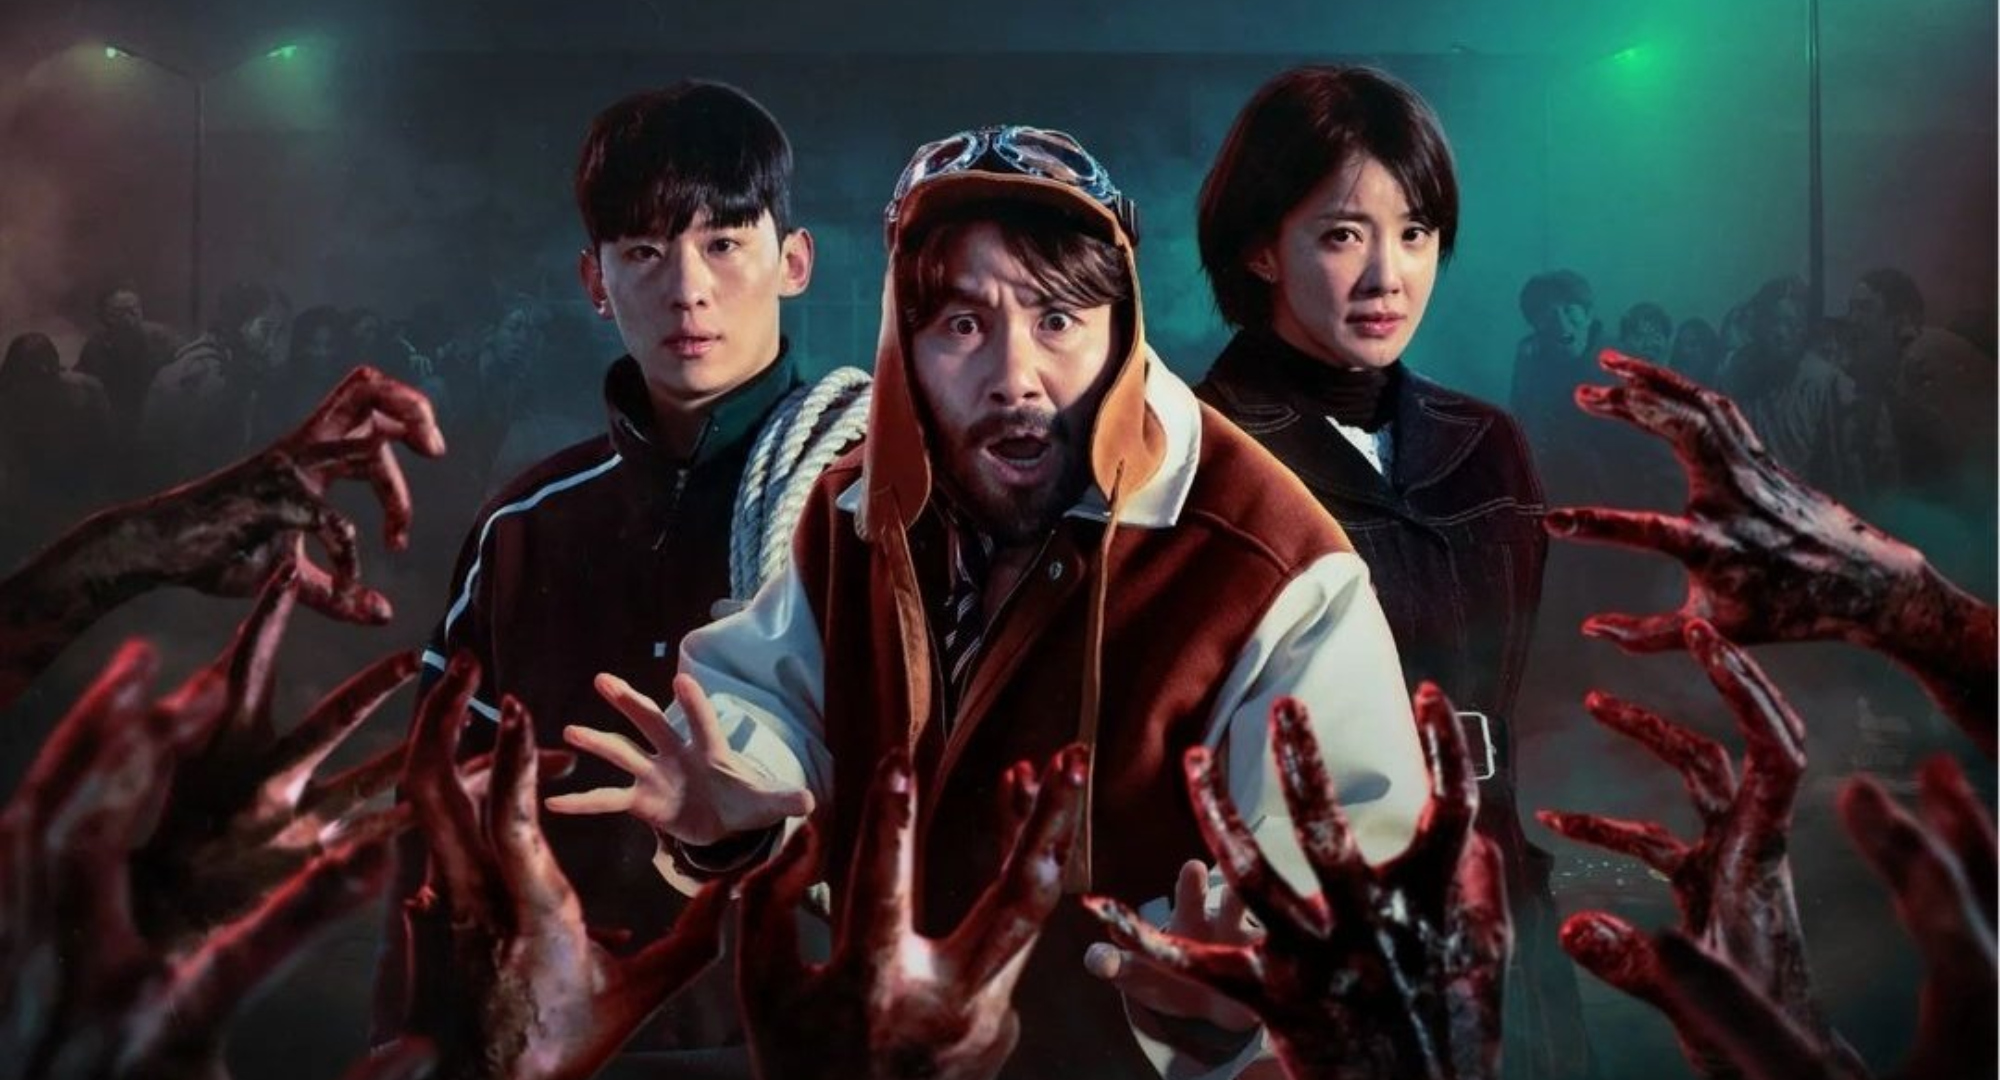 'Single's Inferno' 2 Jin-young, Ro Hong-chul, and Lee Si-young for 'Zombieverse.'